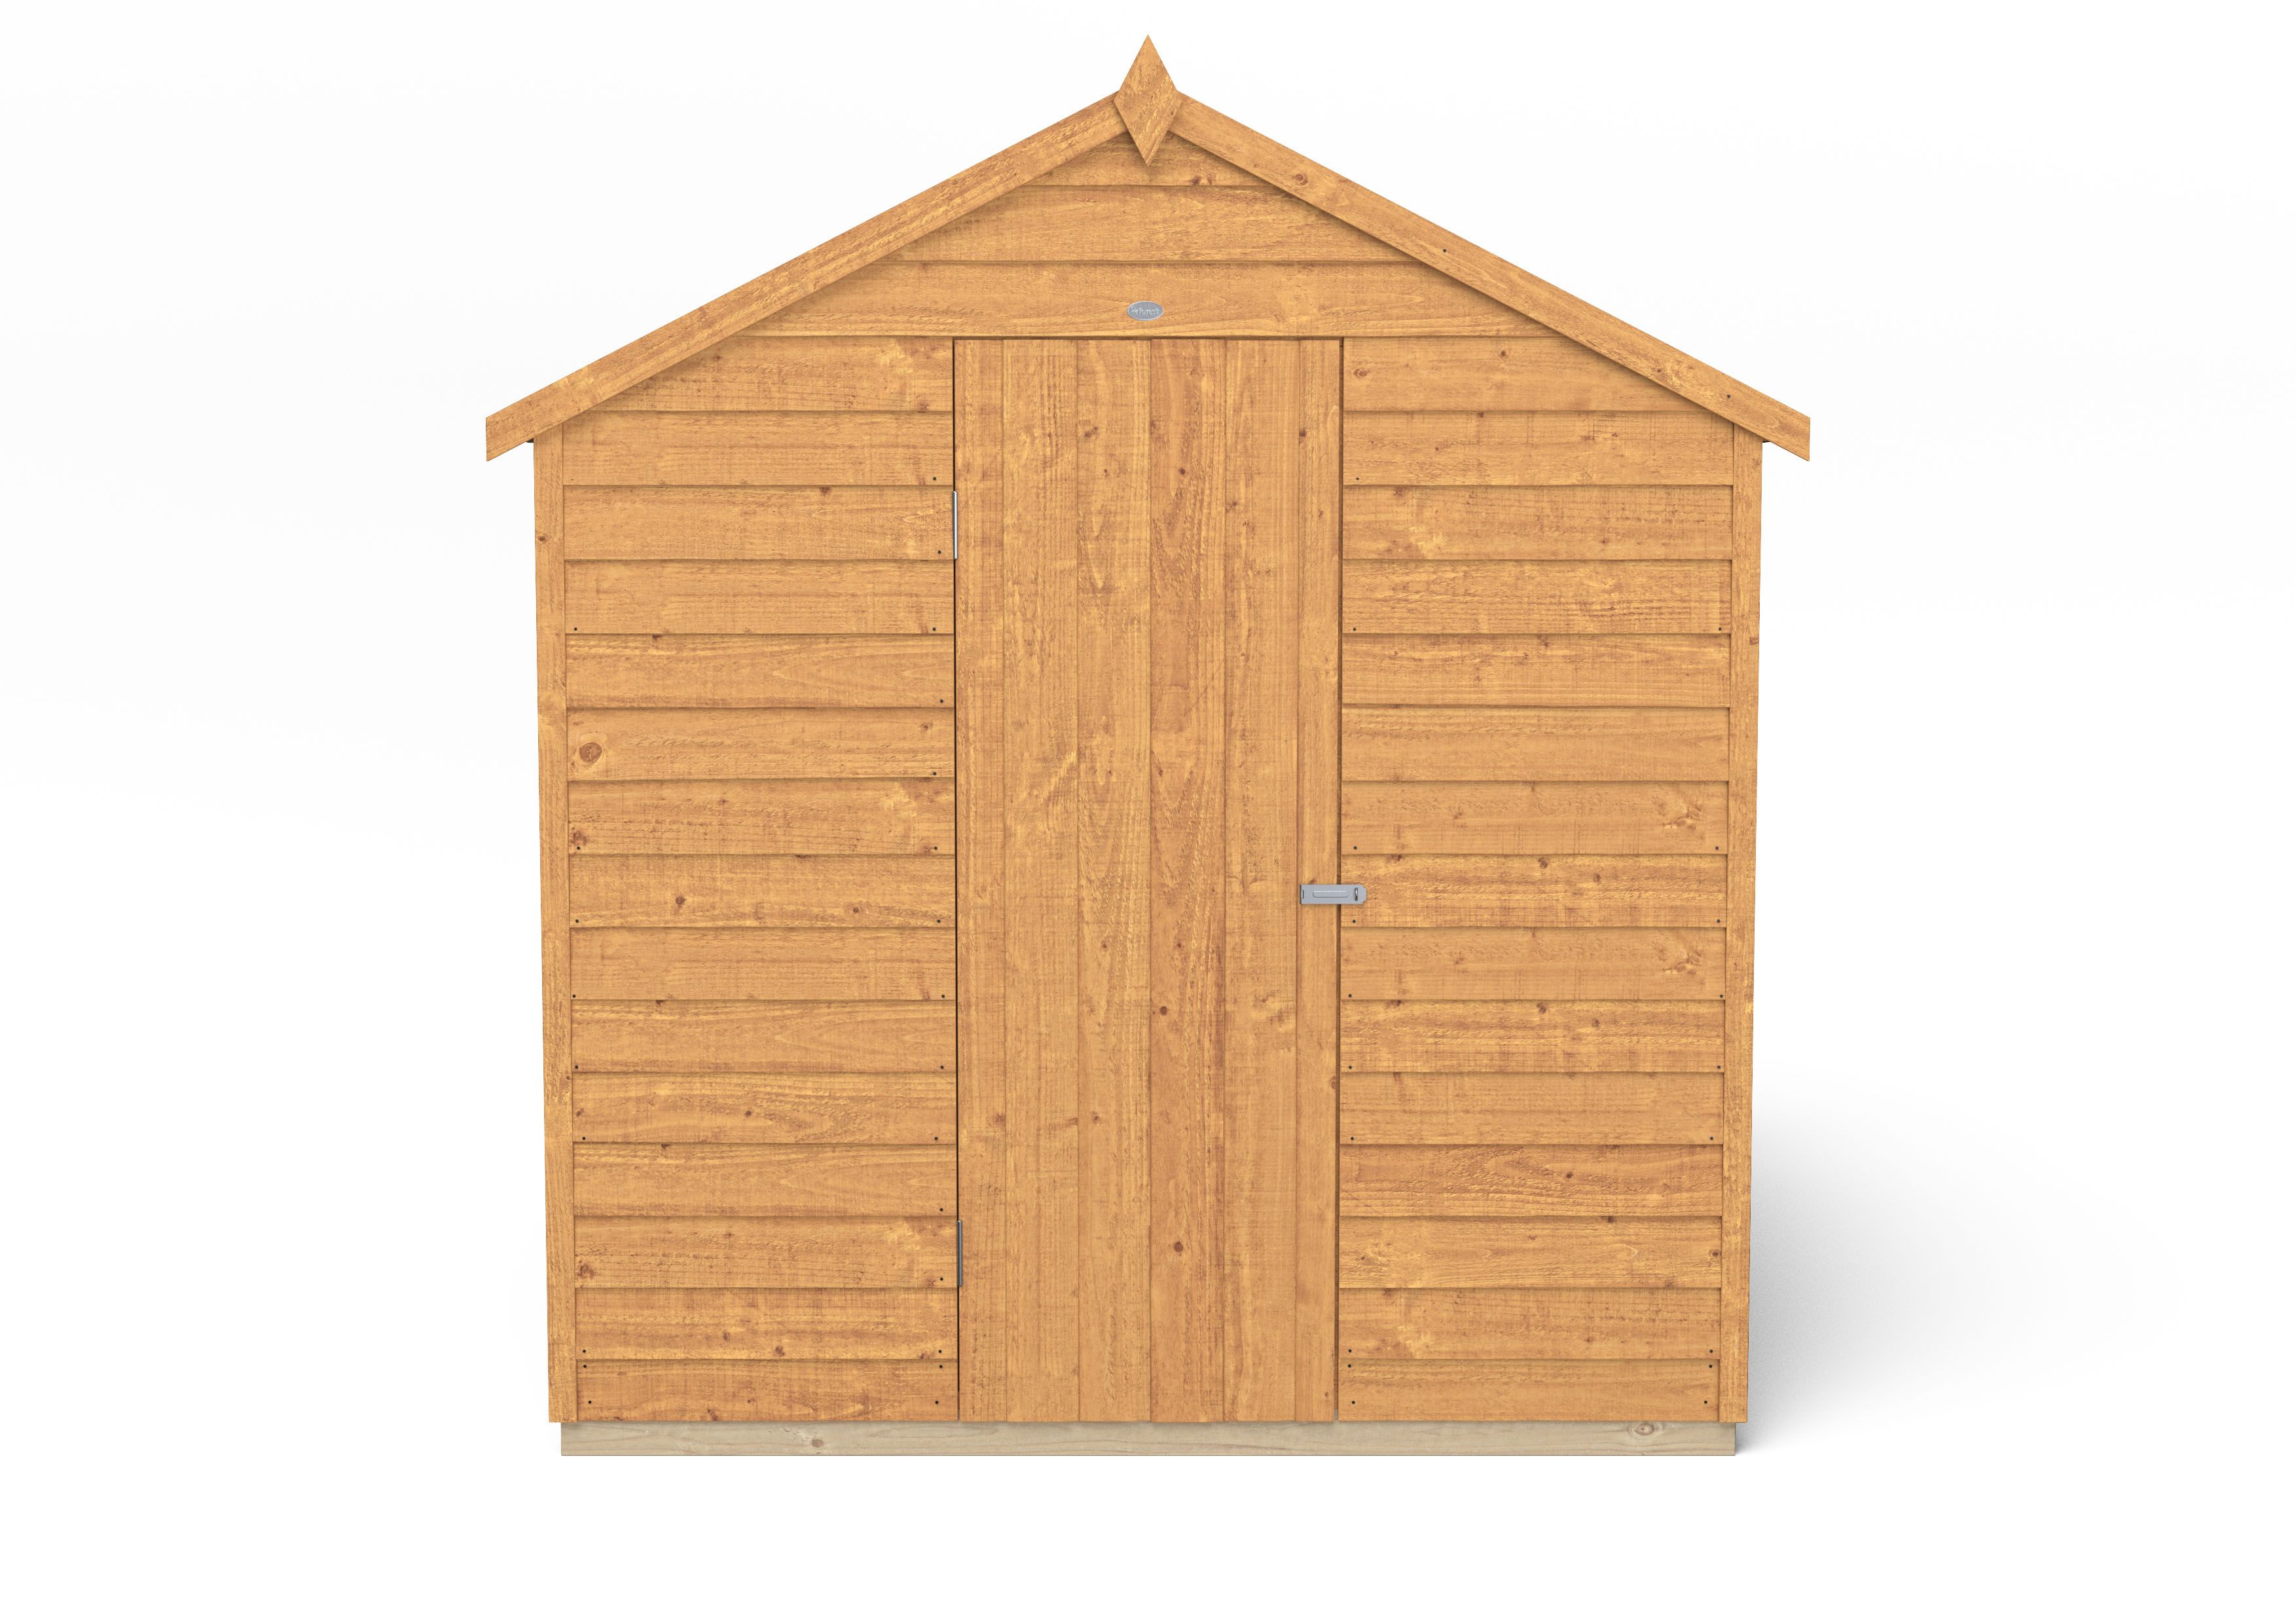 Forest Garden Overlap 8x6 ft Apex Wooden Dip treated Shed with floor & 2 windows - Assembly service included